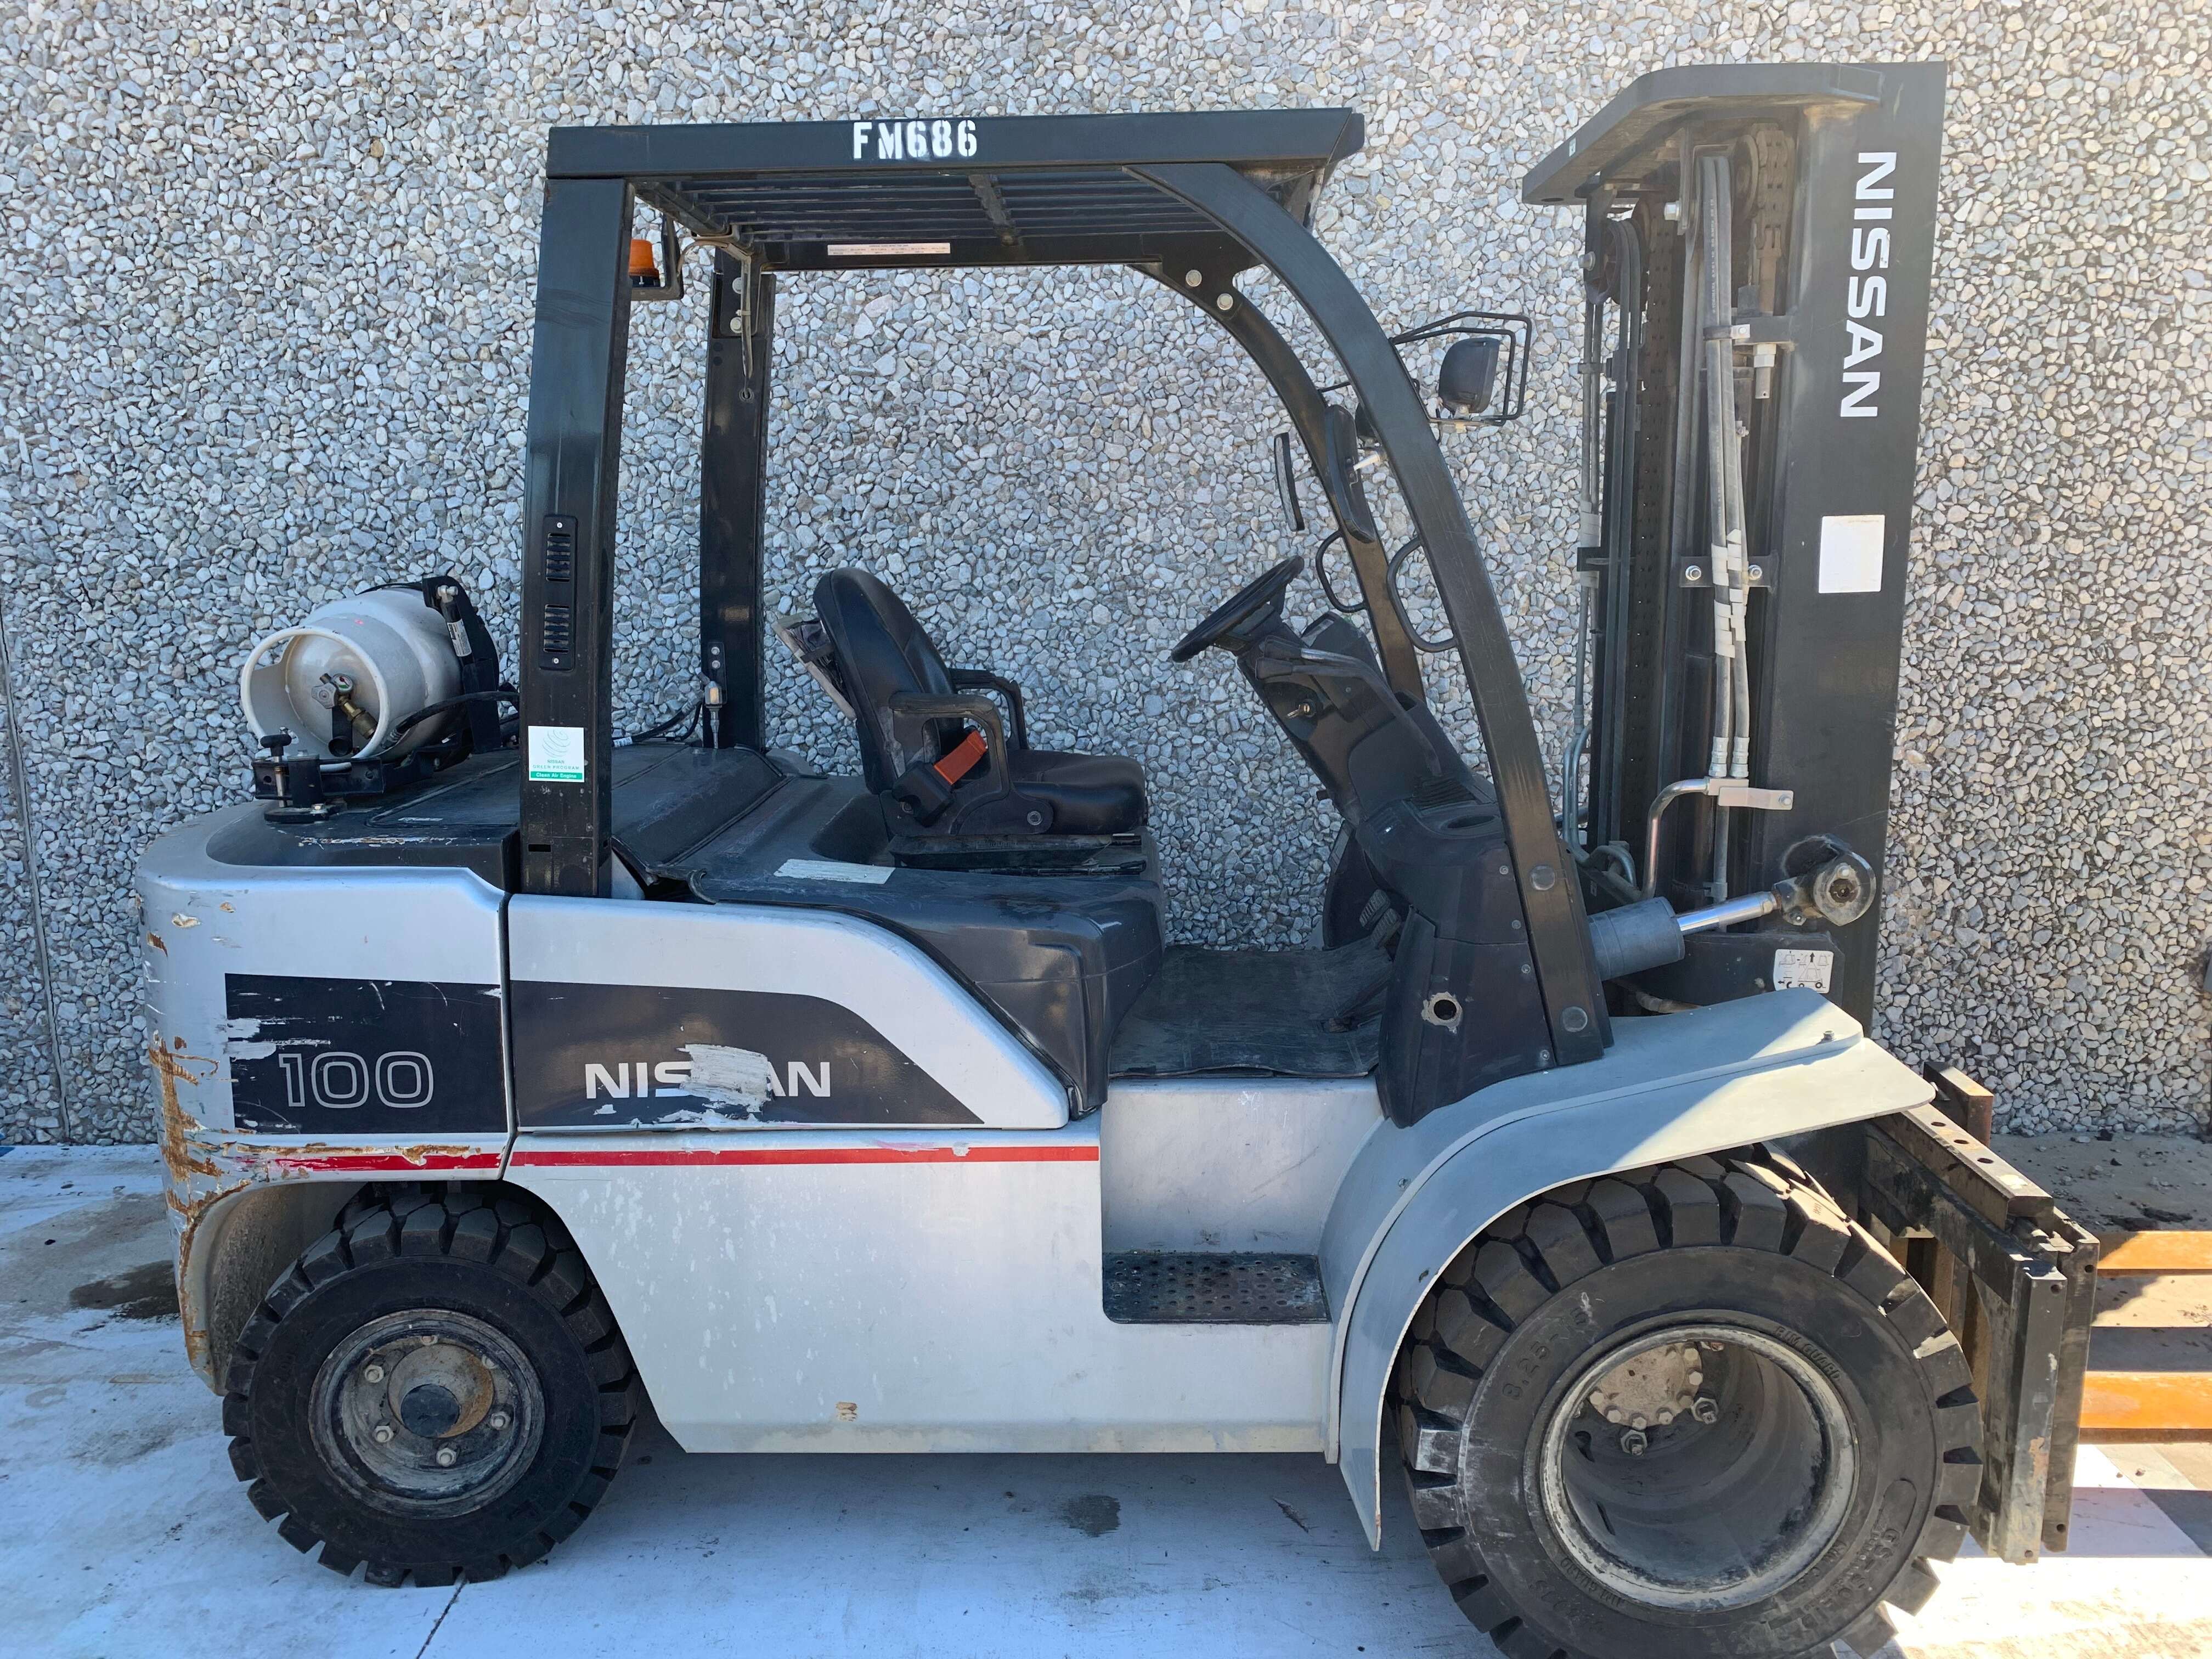 Nissan Pf100ylp Used Nissan Pf100ylp For Sale Used Forklift